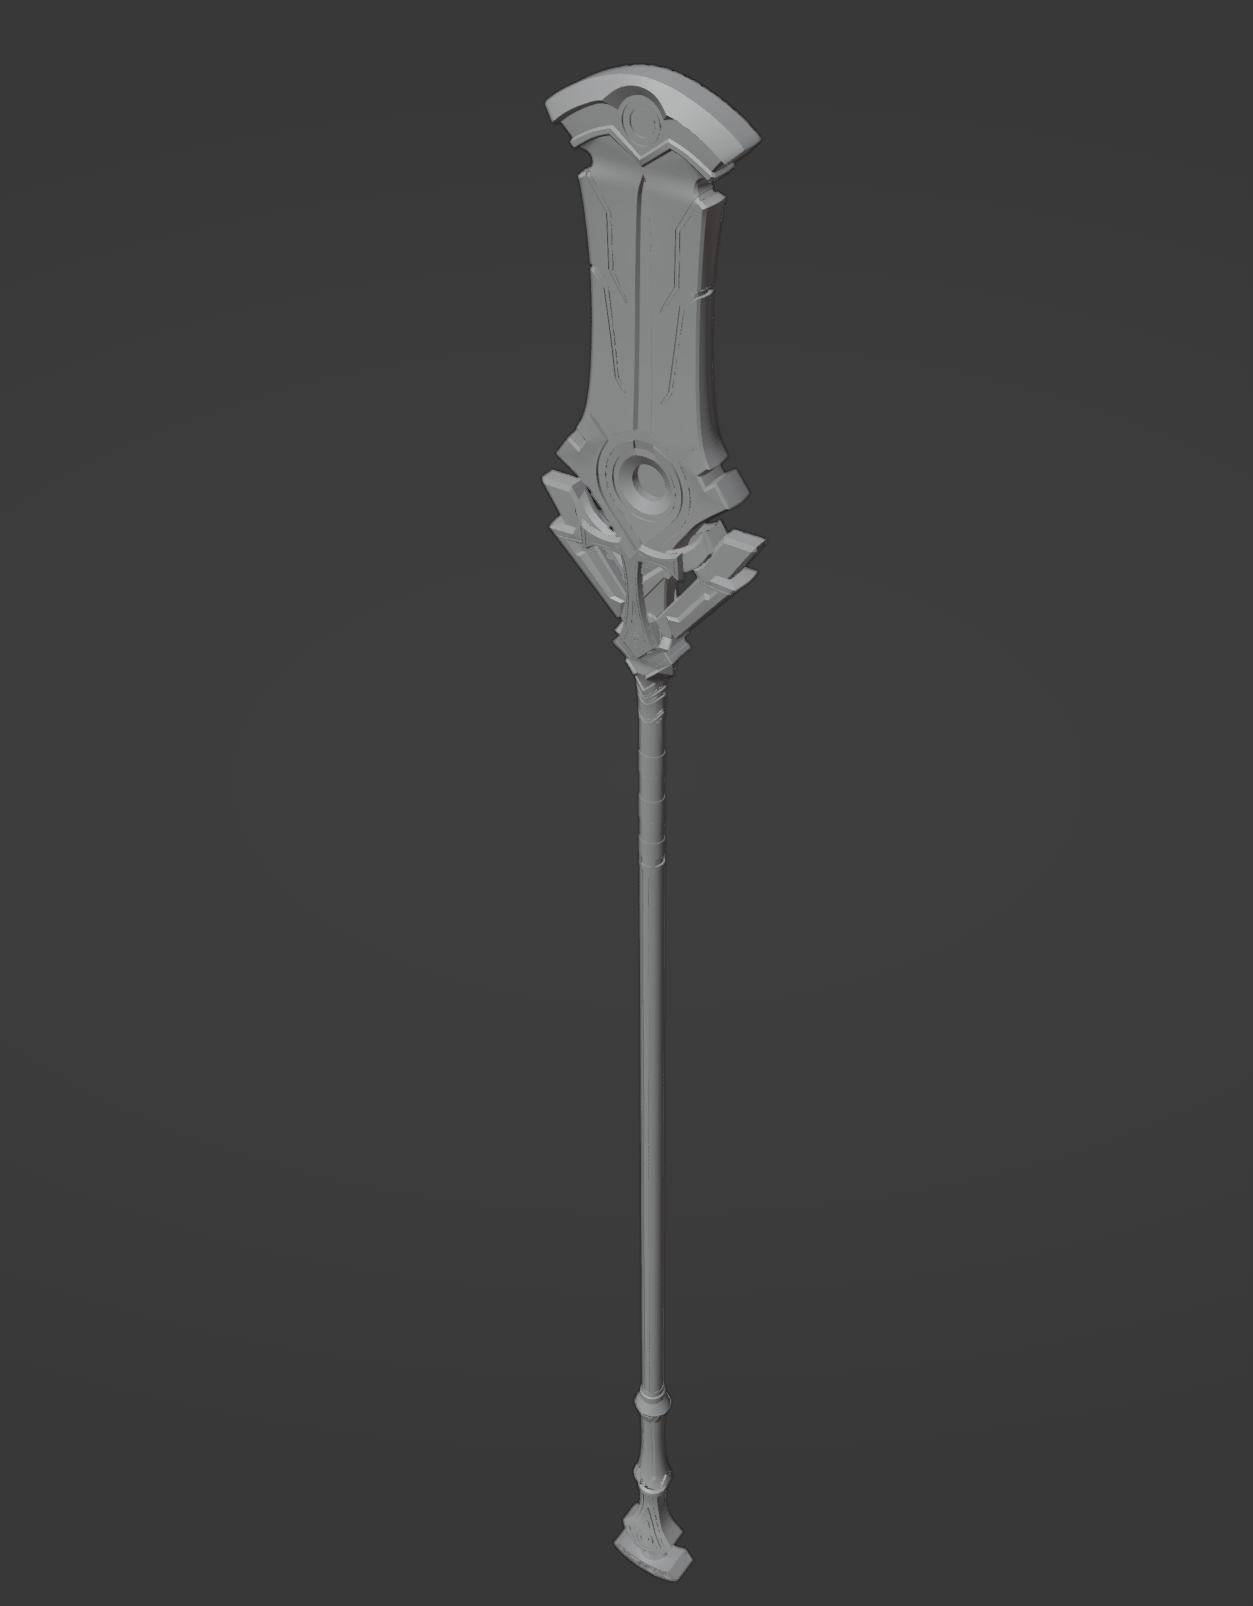 Cyno's "Staff of the Scarlet Sands" - Digital 3D Model Files and Physical 3D Printed Kit Options - Staff of the Scarlet Sands - Cyno Cosplay